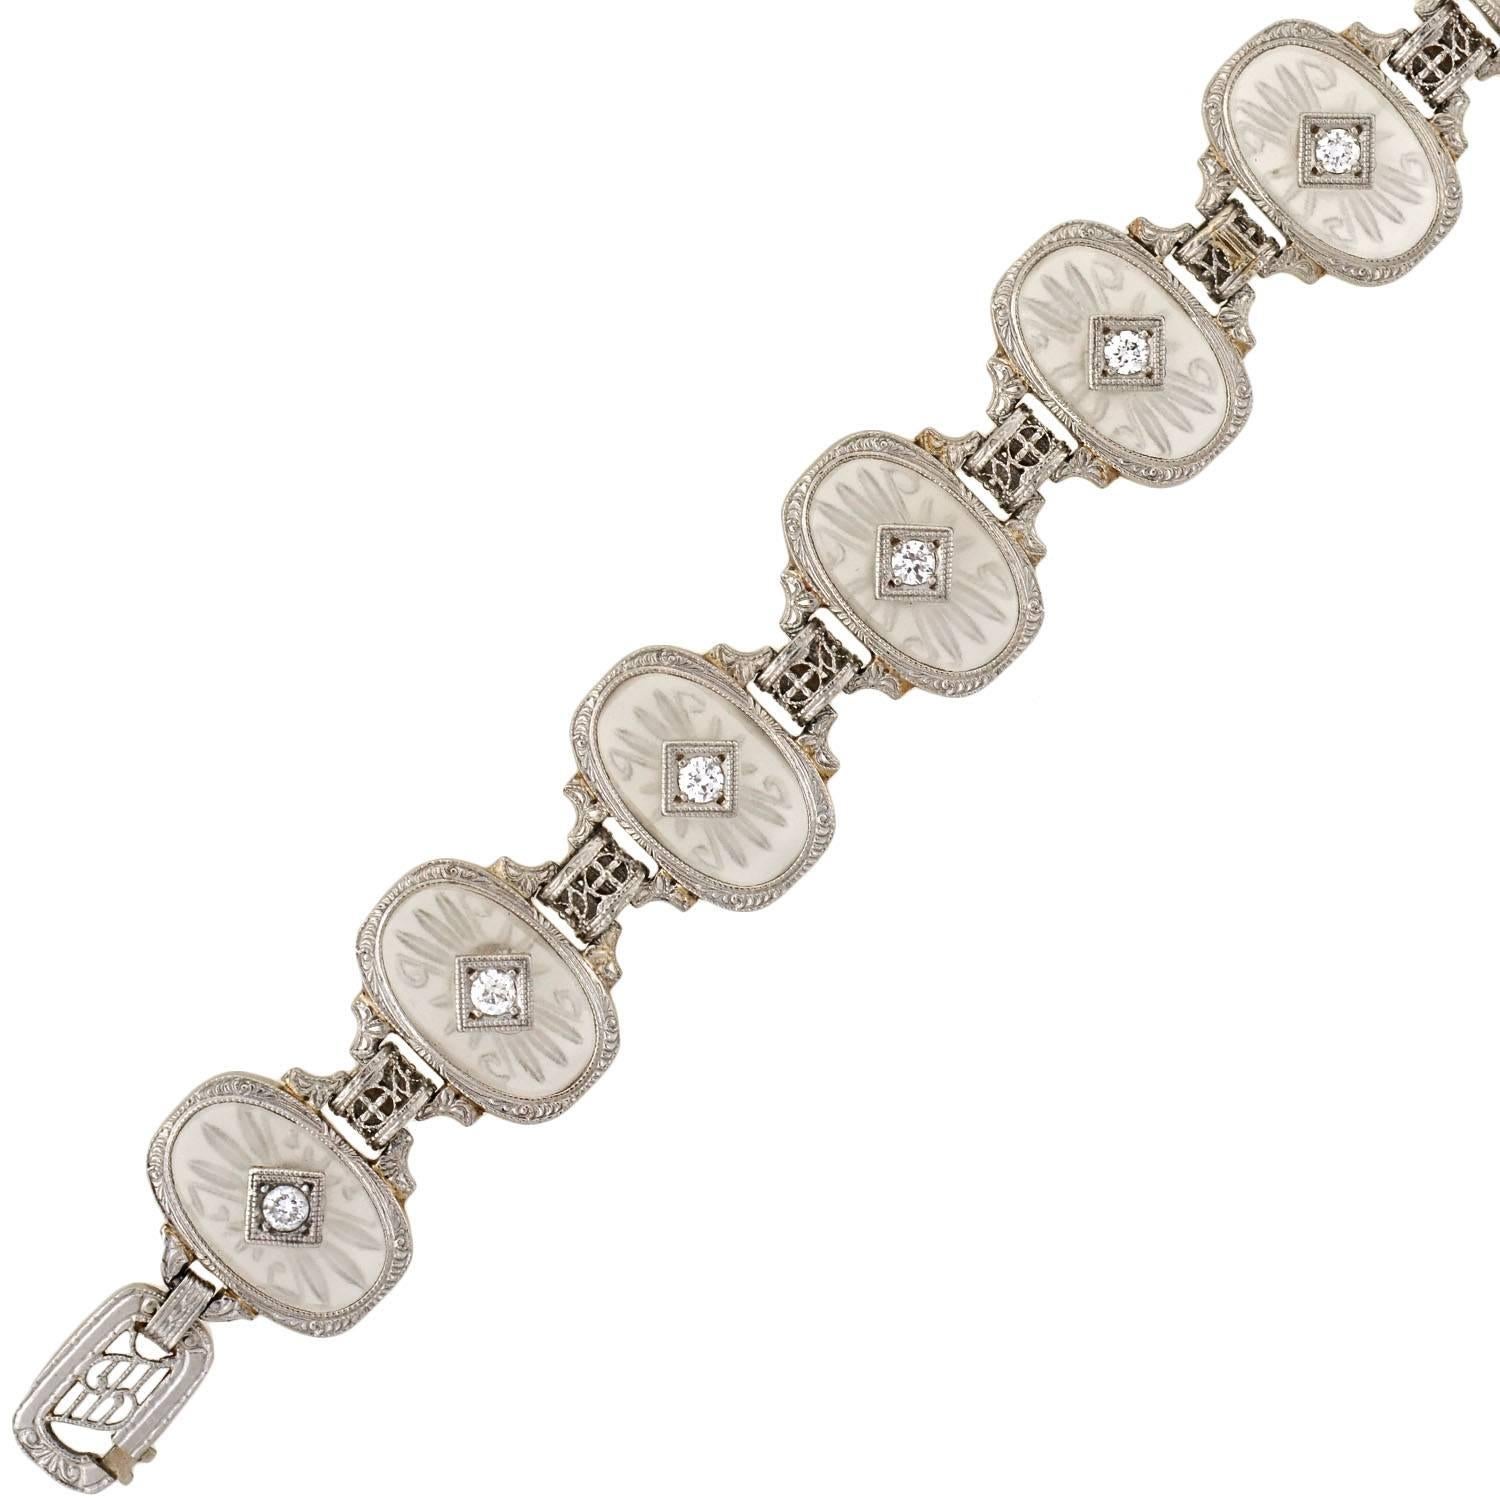 This gorgeous rock quartz crystal bracelet was made by Krementz during the Art Deco (ca1920) era! The 14kt white gold setting is topped in platinum, and displays a row of rock quartz crystal links. Delicate accent diamonds are set at the center of